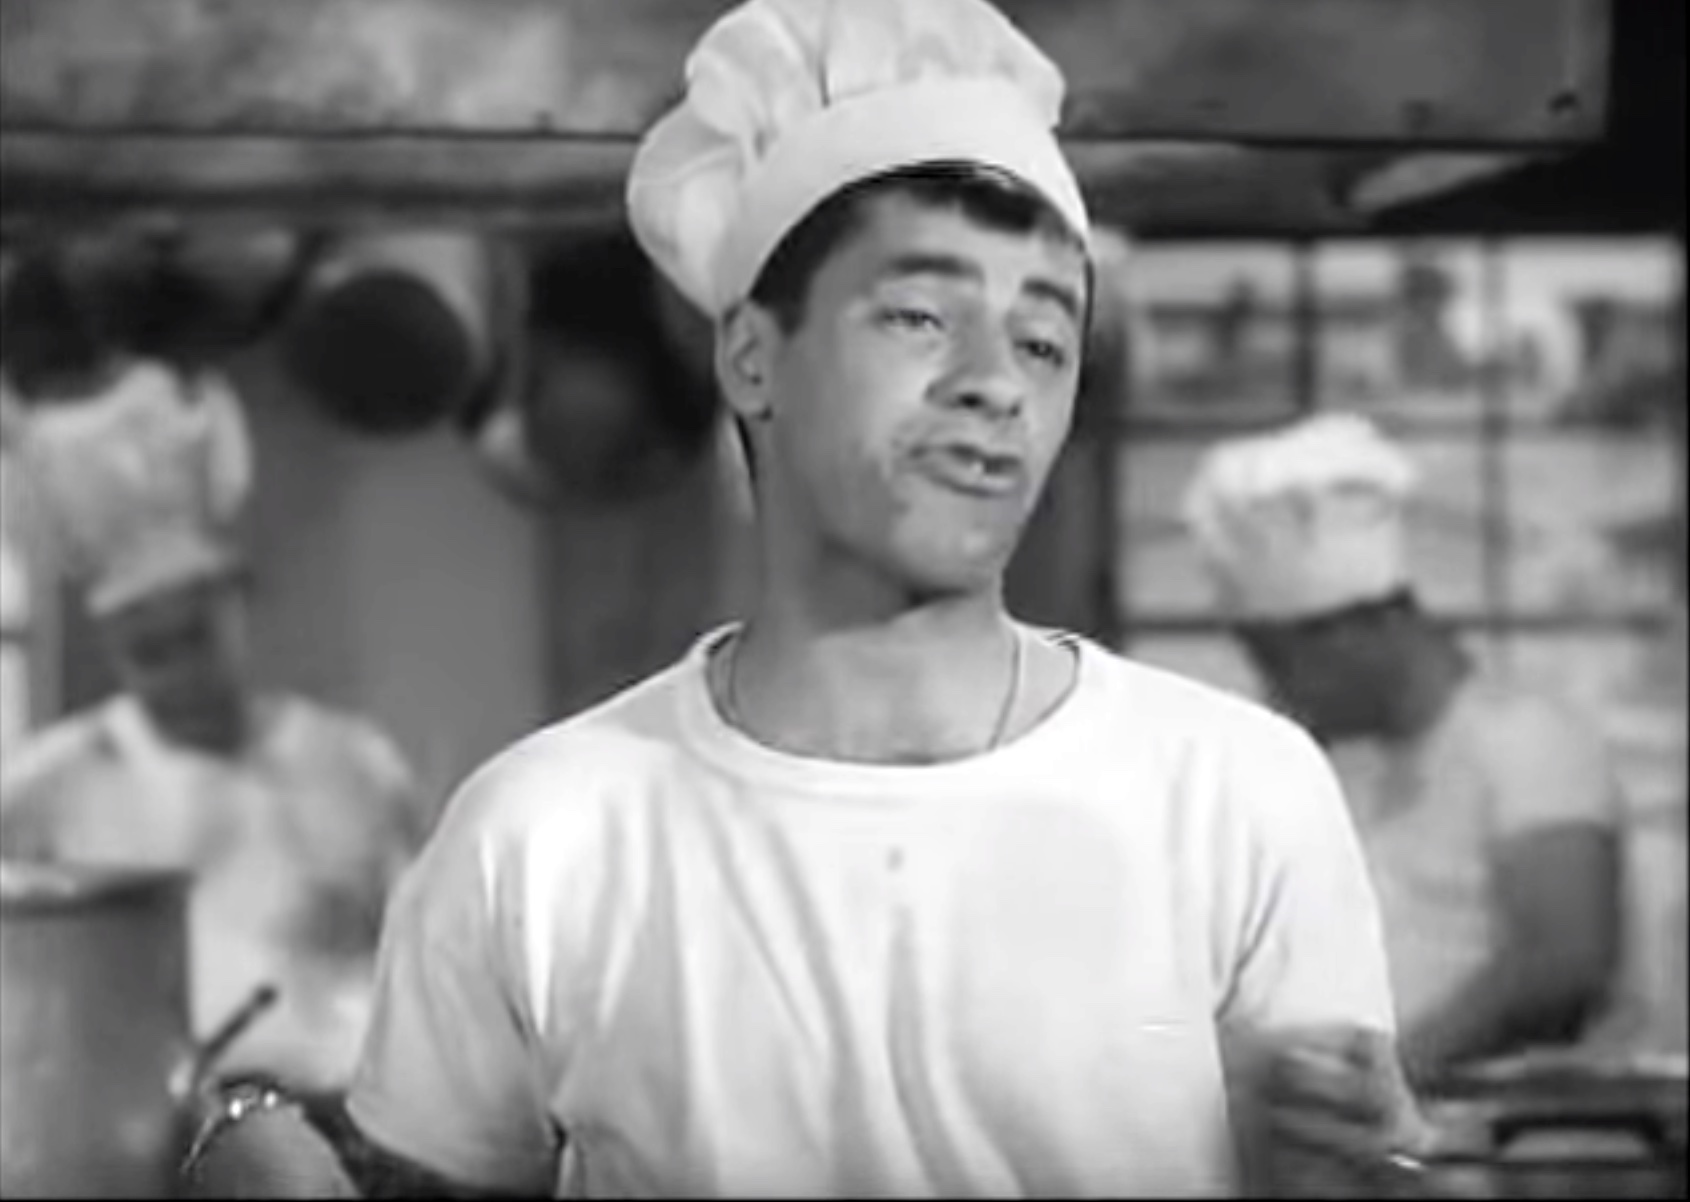 Jerry Lewis singing "The Navy gets the gravy, but the Army gets the beans"